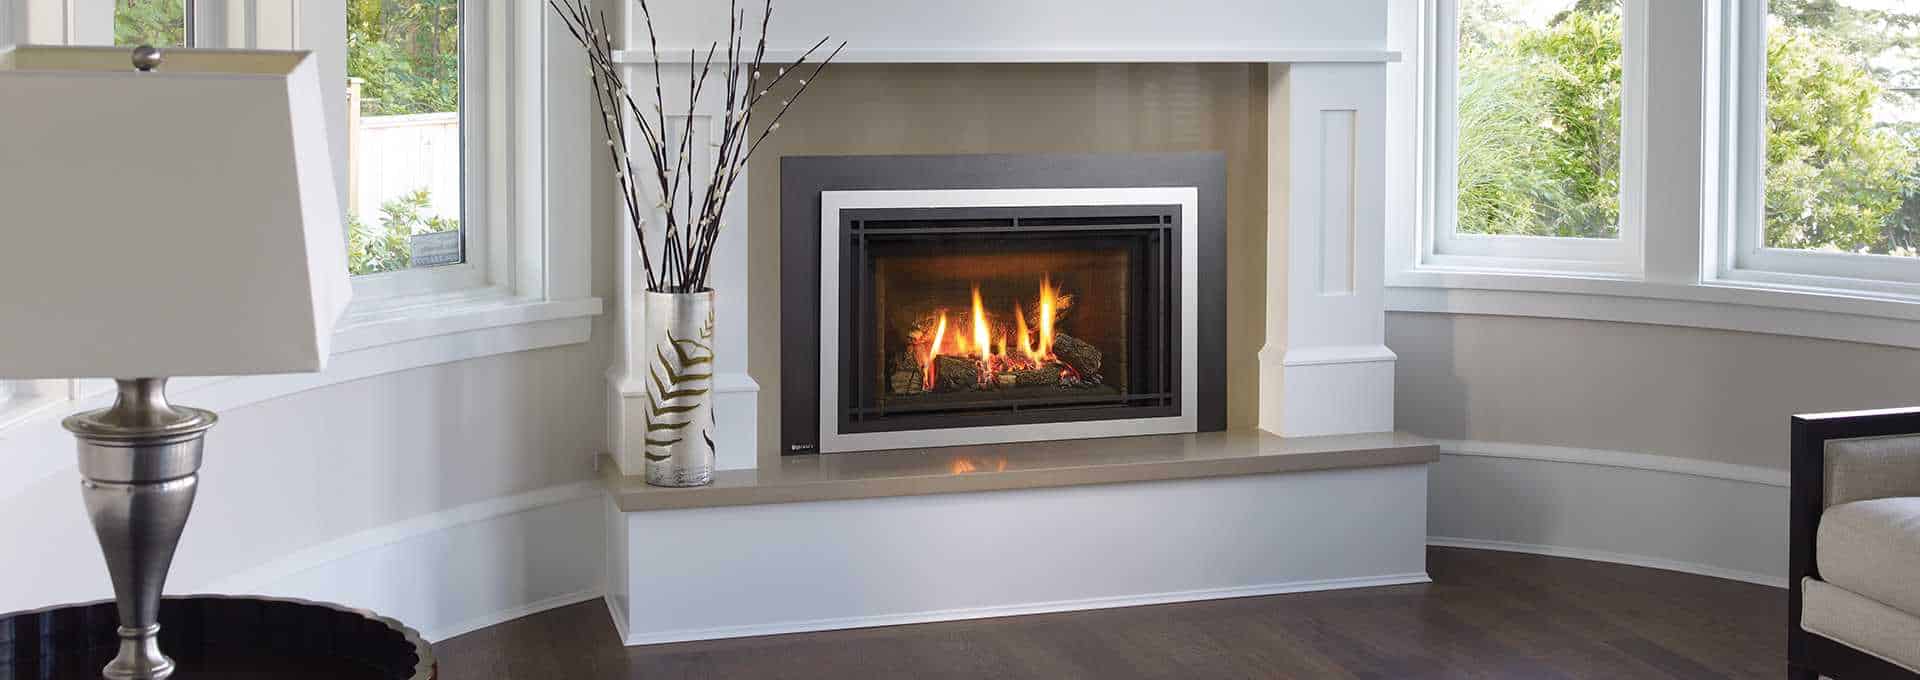 Top 5 Trends For Gas Fireplace Inserts, Top Rated Gas Fireplace Inserts 2018